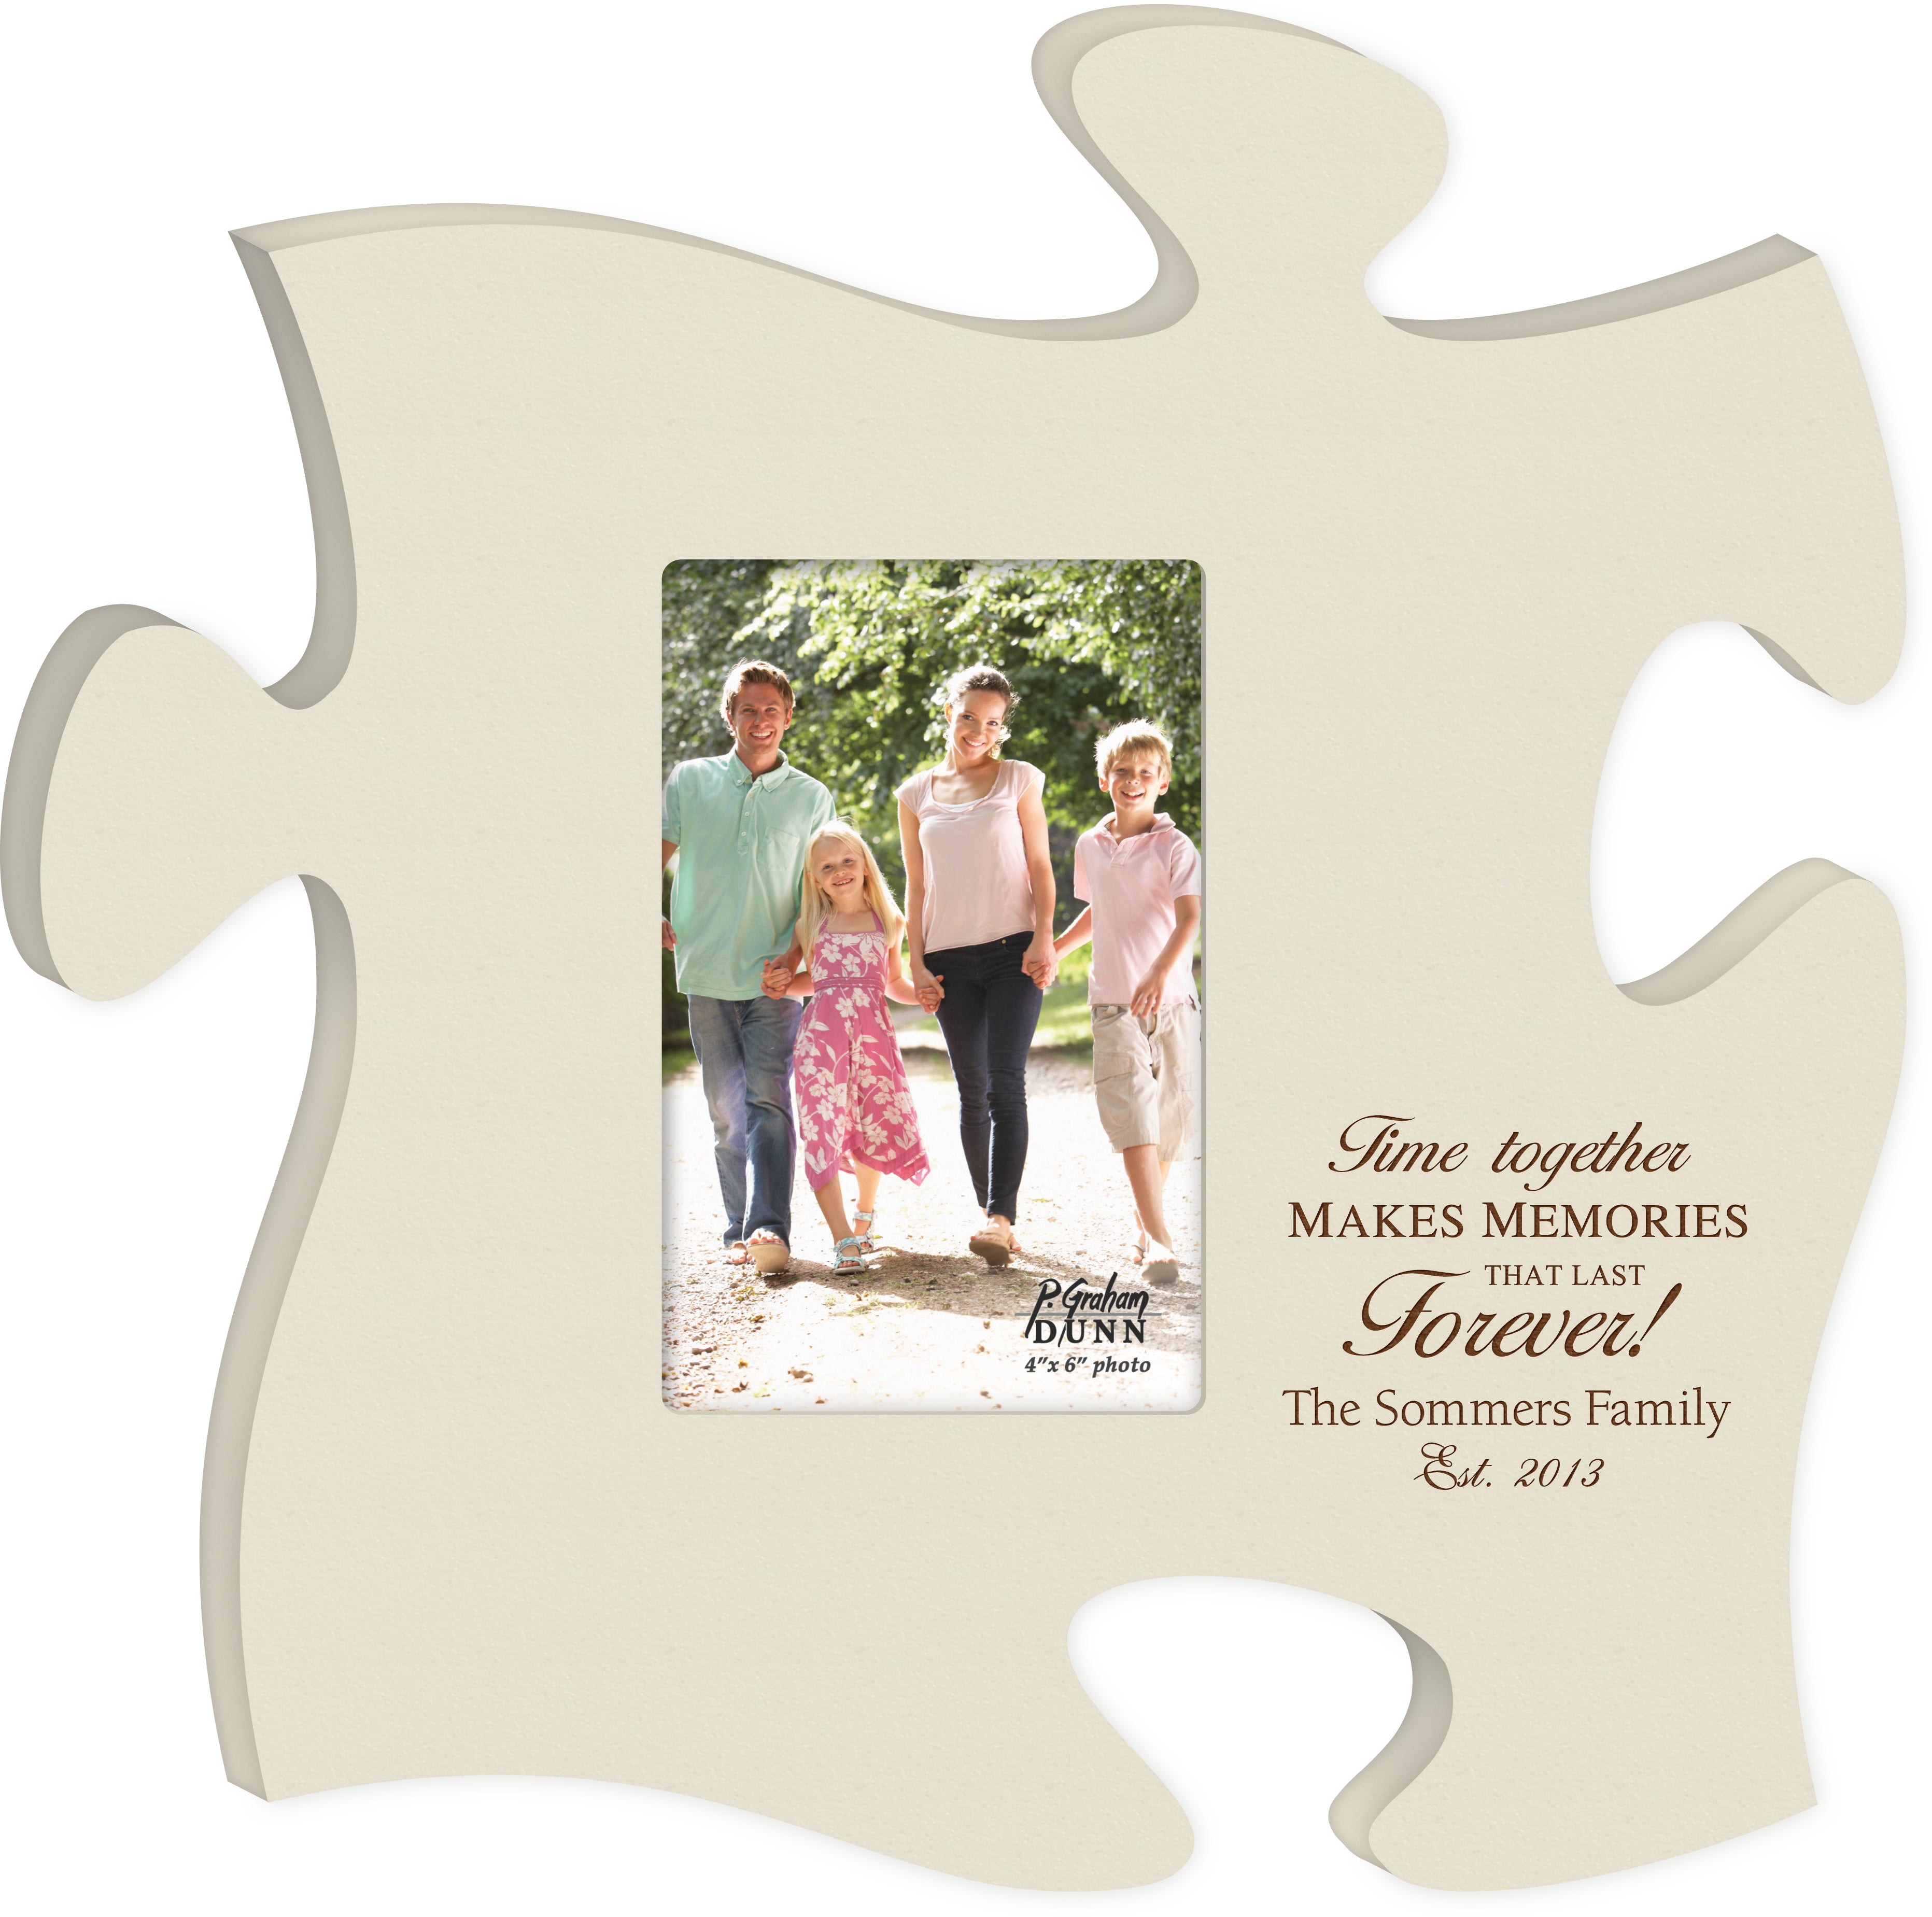  Wedding Picture Frame, Personalized Picture Frame, 4x6